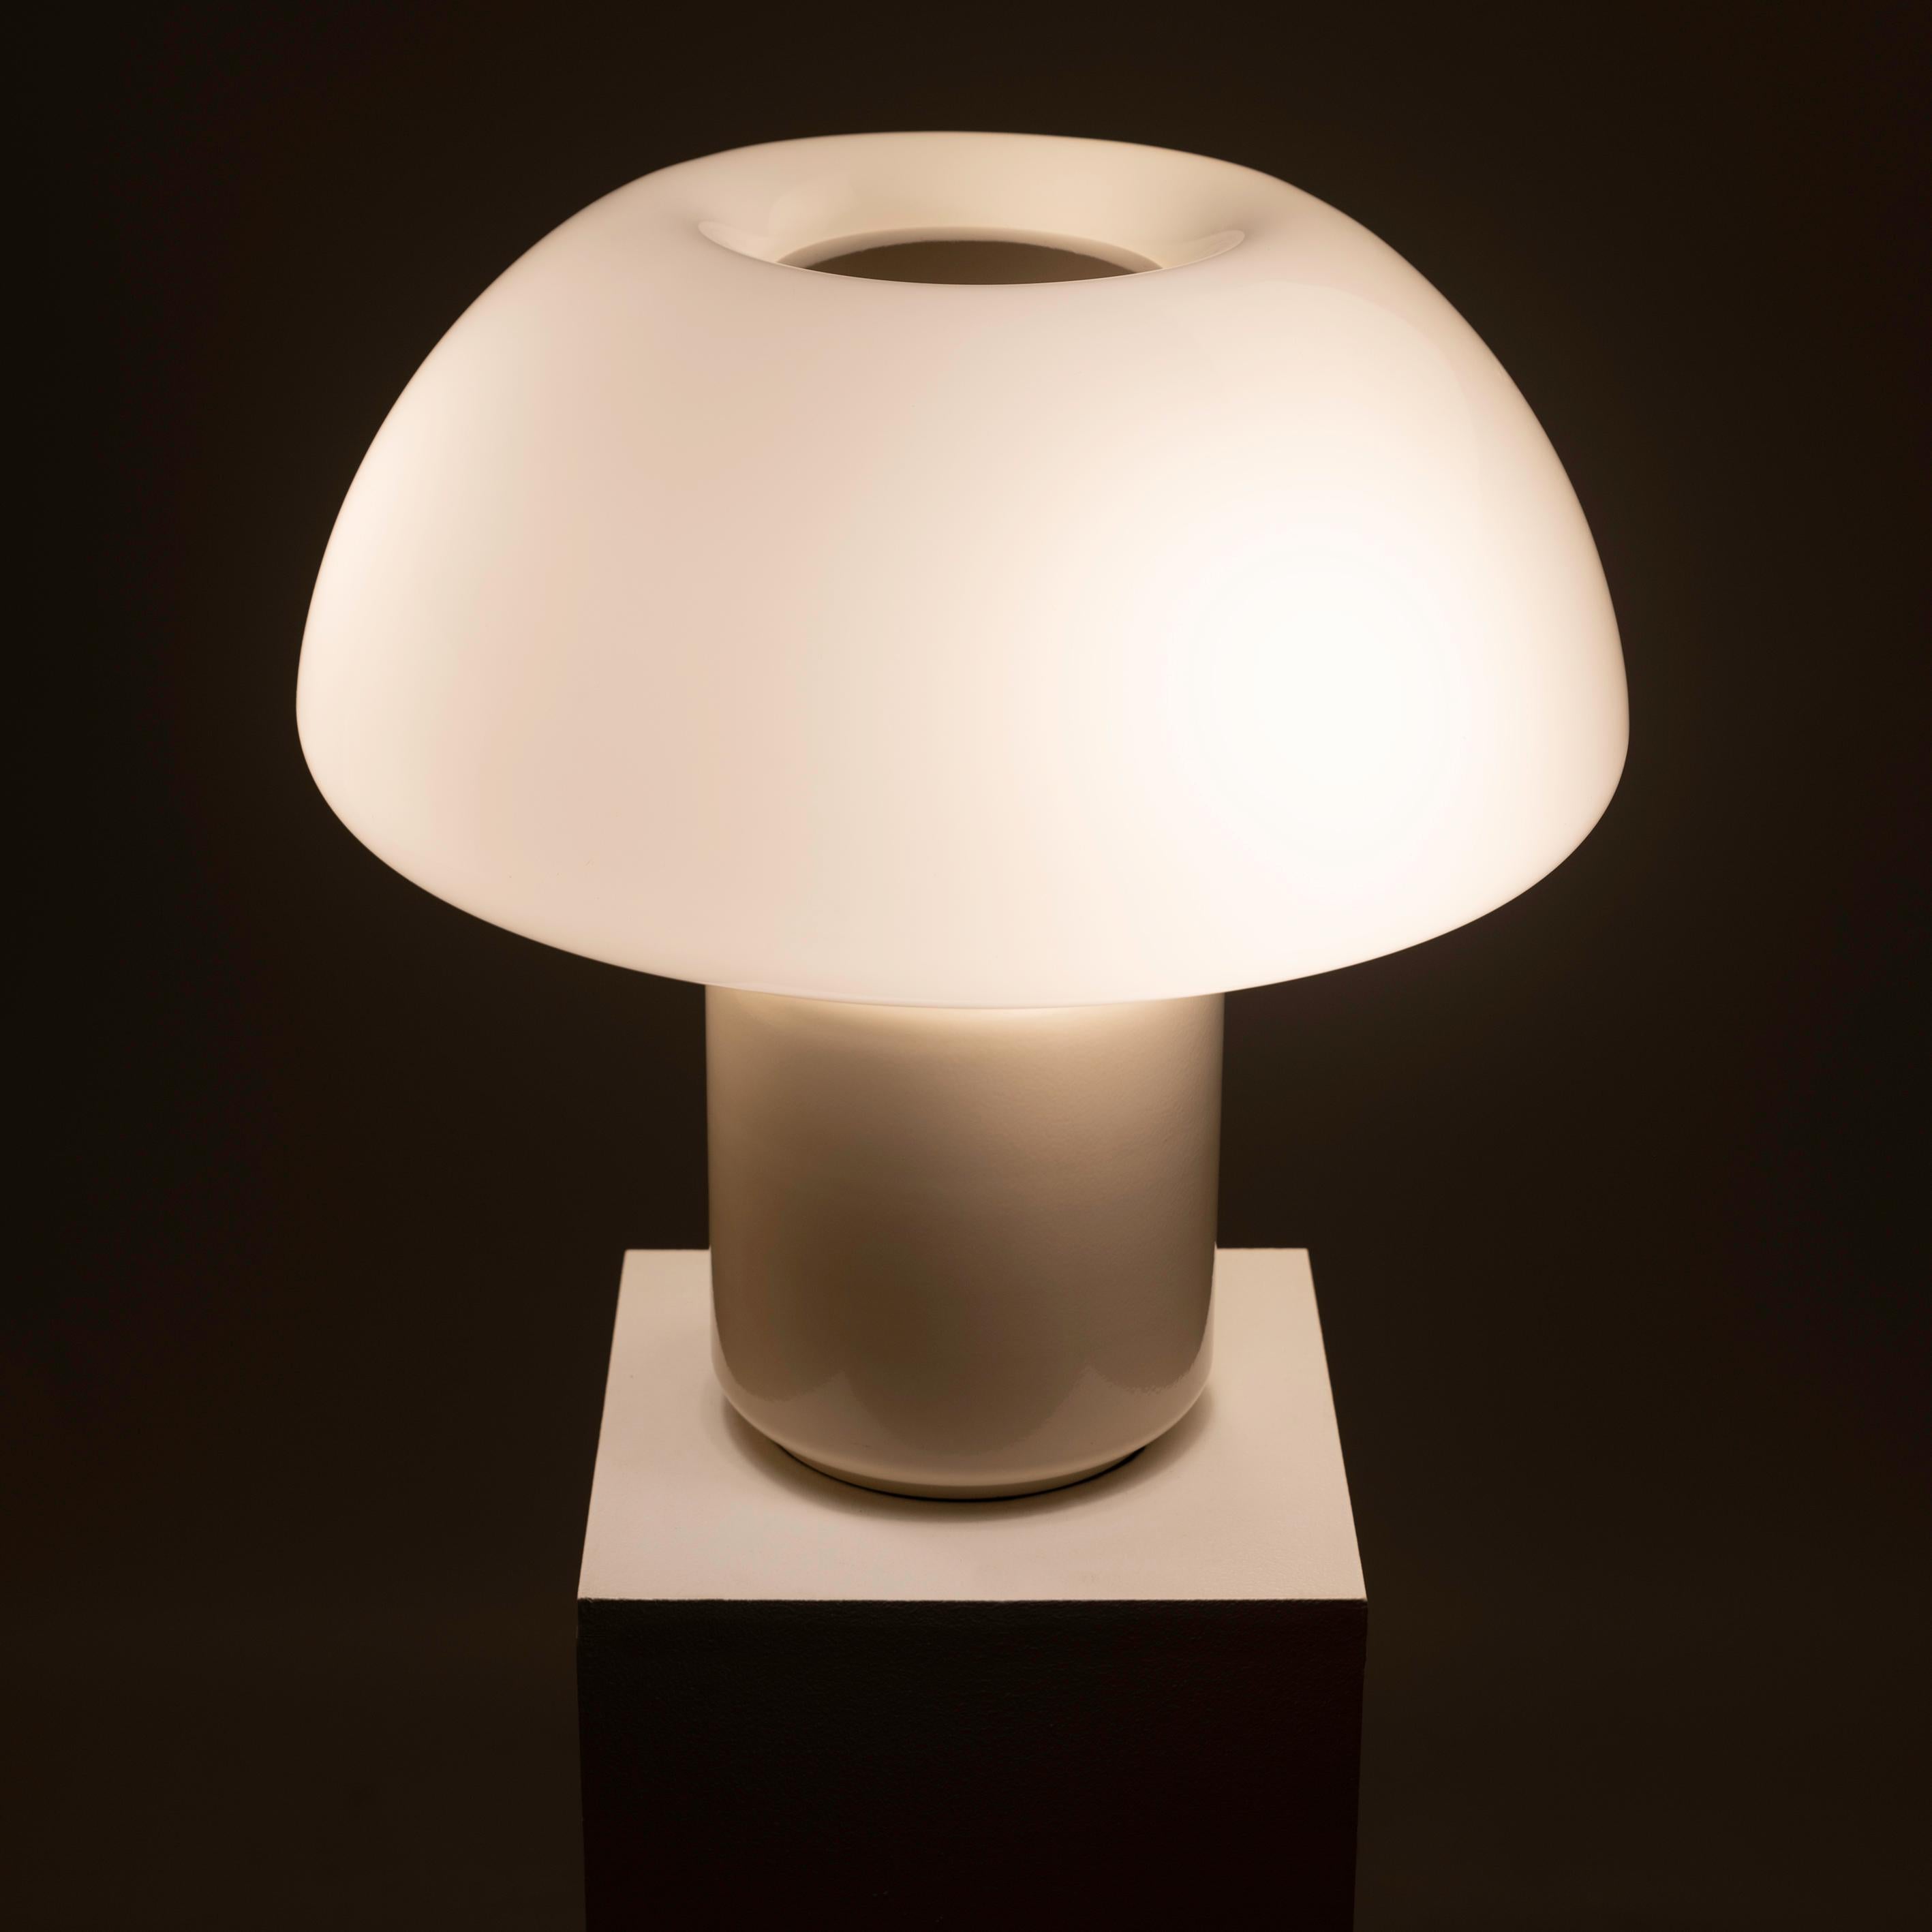 Italian A magnificent mushroom Lamp by Elio Martinelli for Martinelli Luce, Italy 1970s